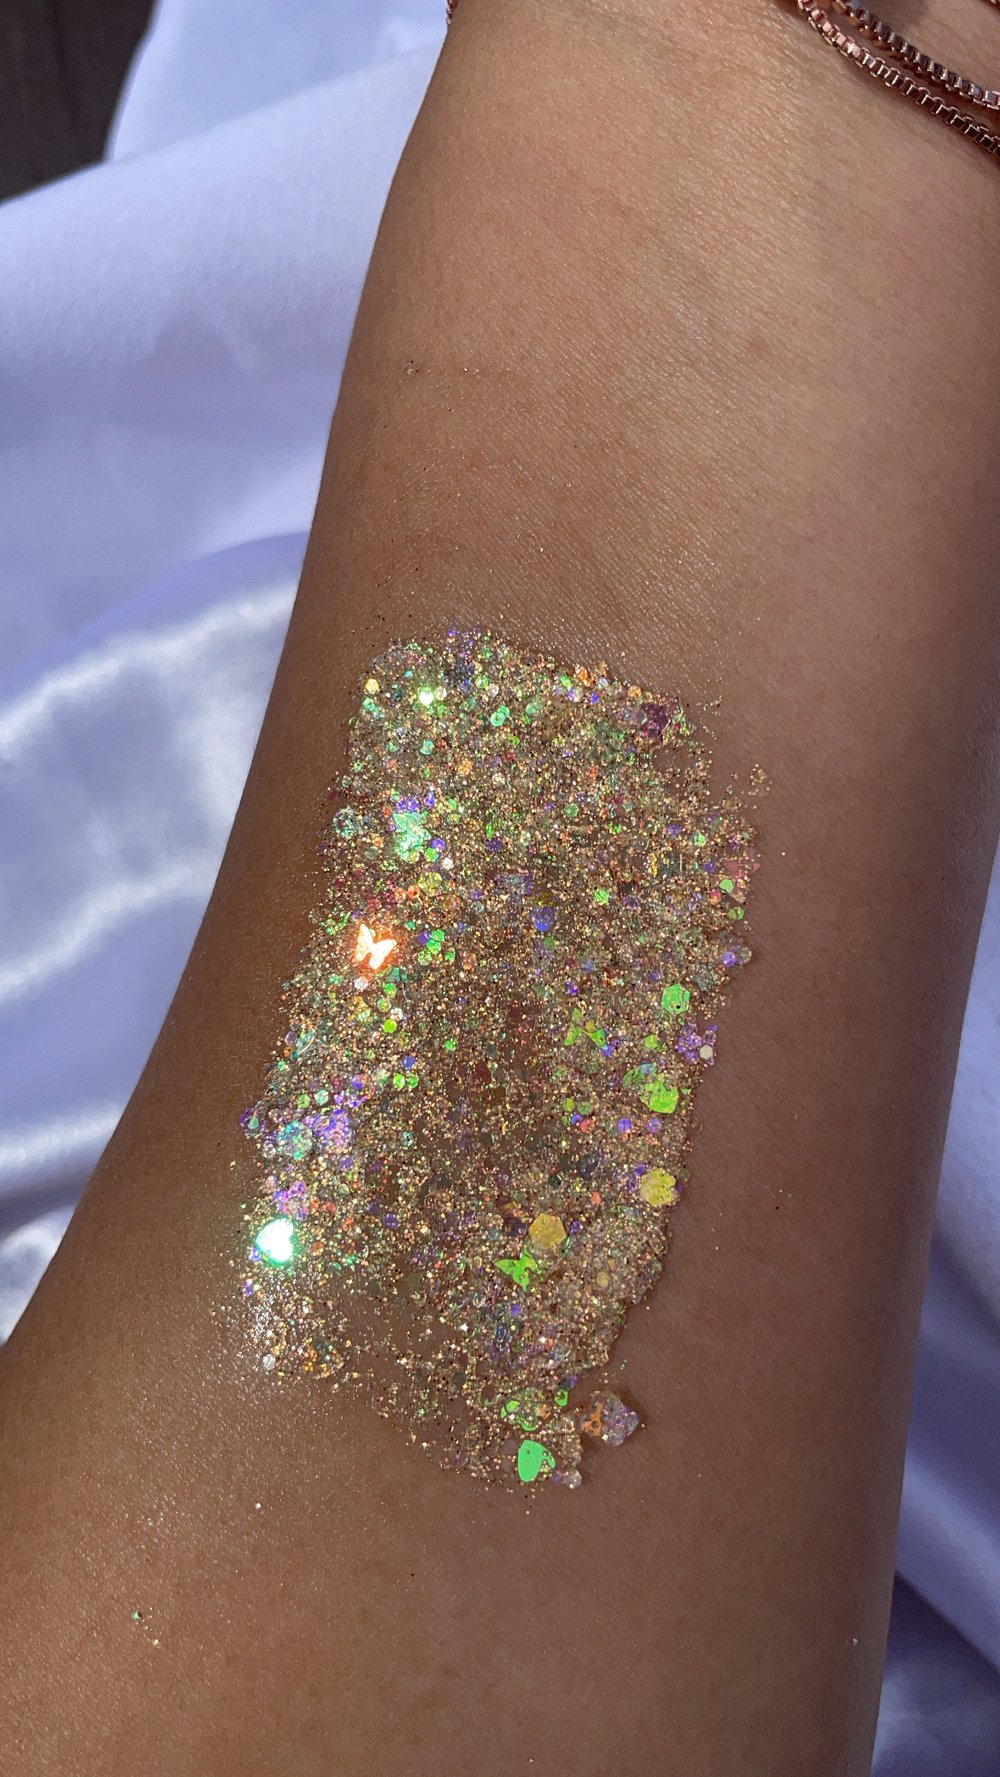 Image of Summer Flick Pressed Glitter Compact